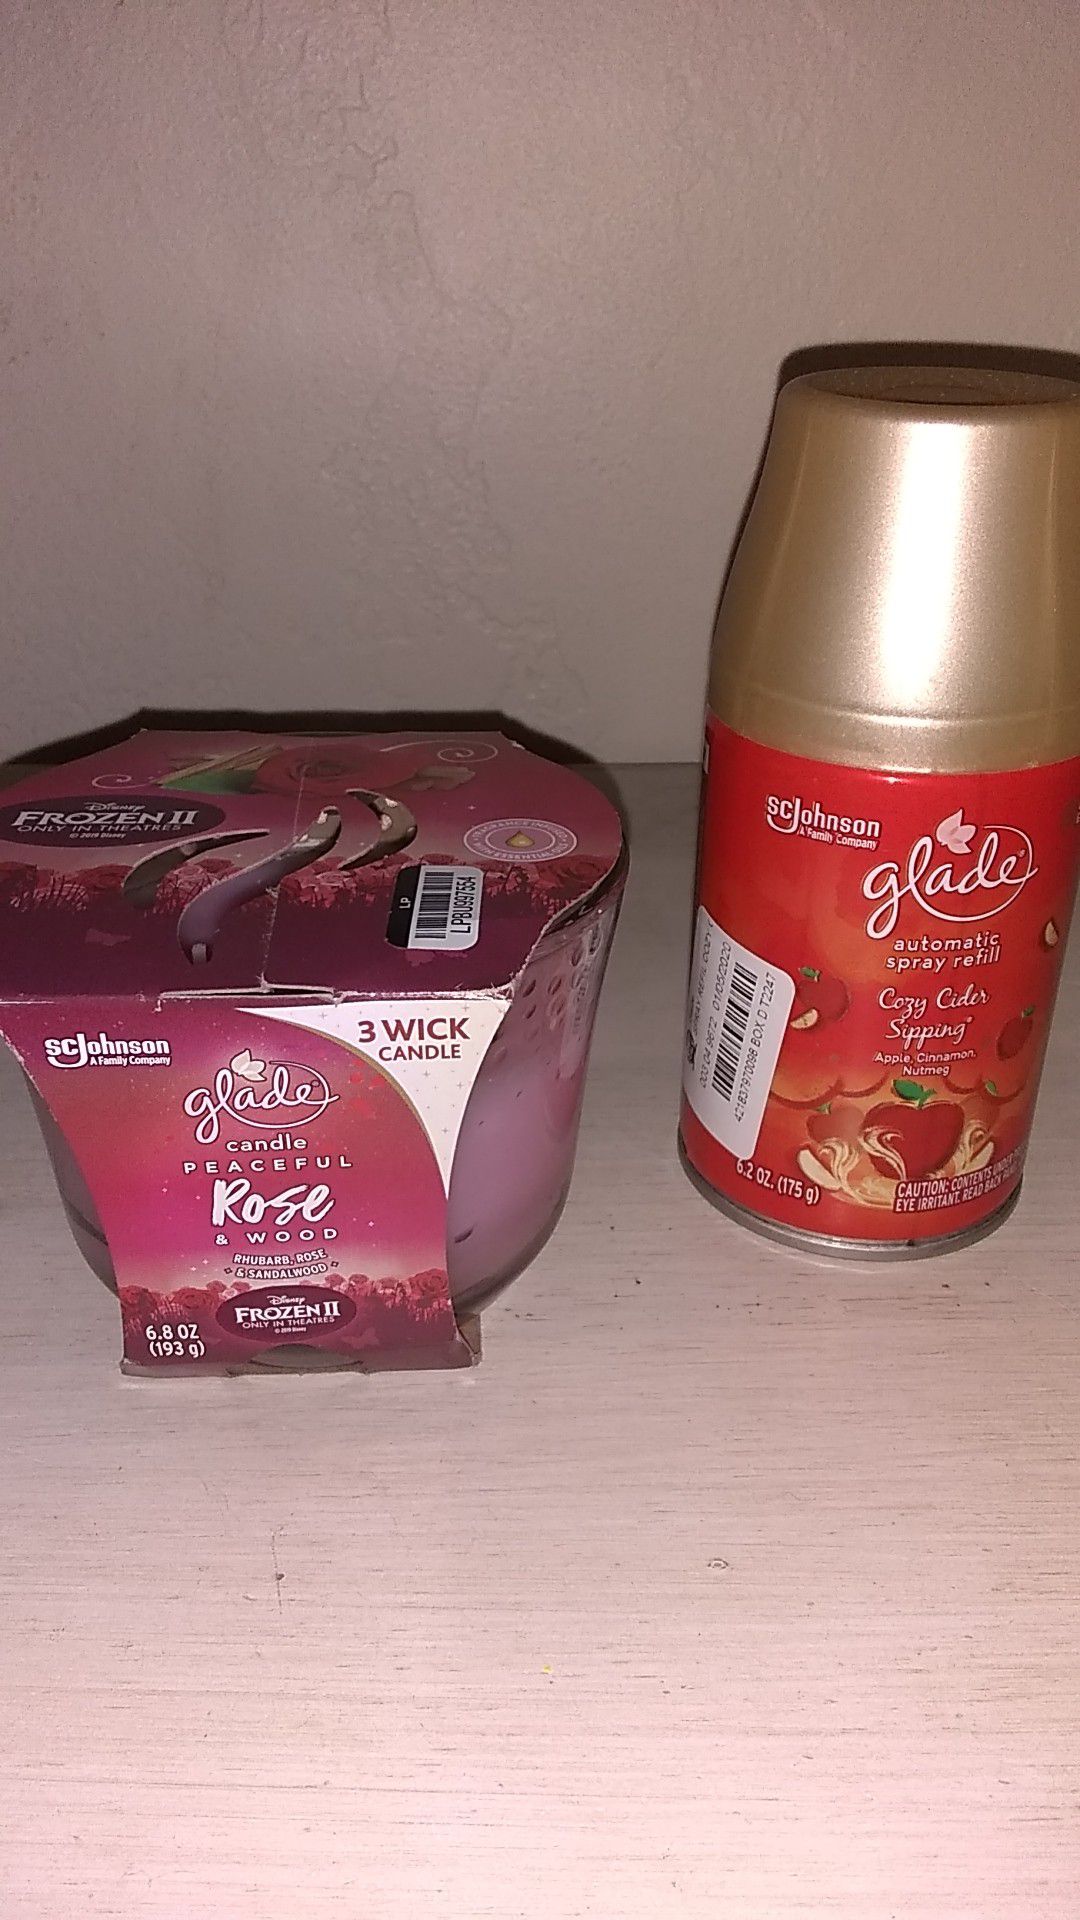 2 for $5 glade products